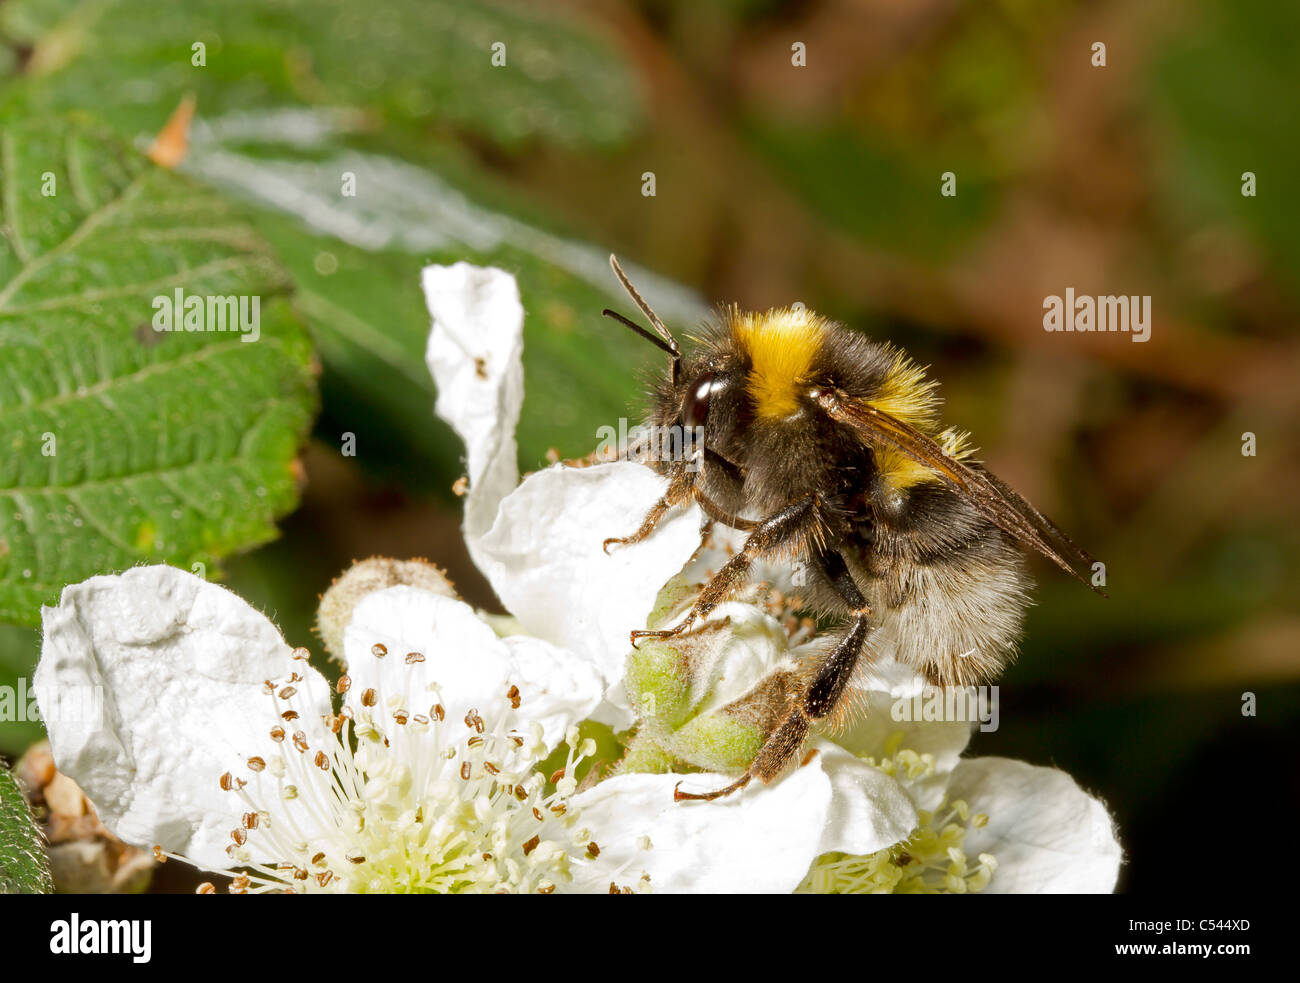 Close up bumble bee on white flower Stock Photo